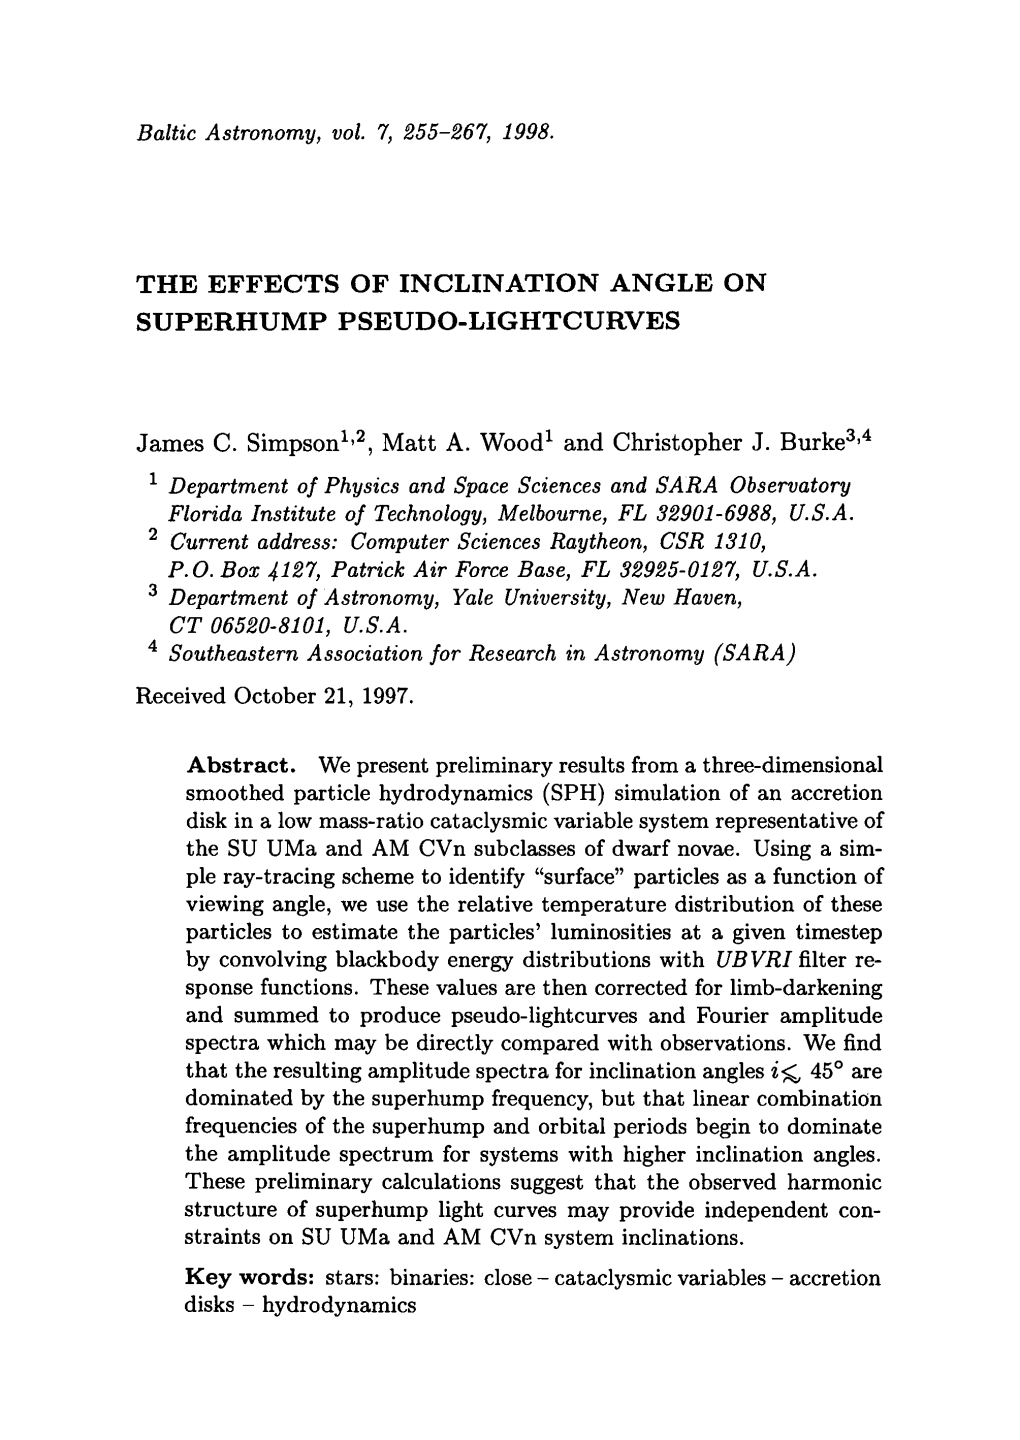 The Effects of Inclination Angle on Superhump Pseudo-Lightcurves